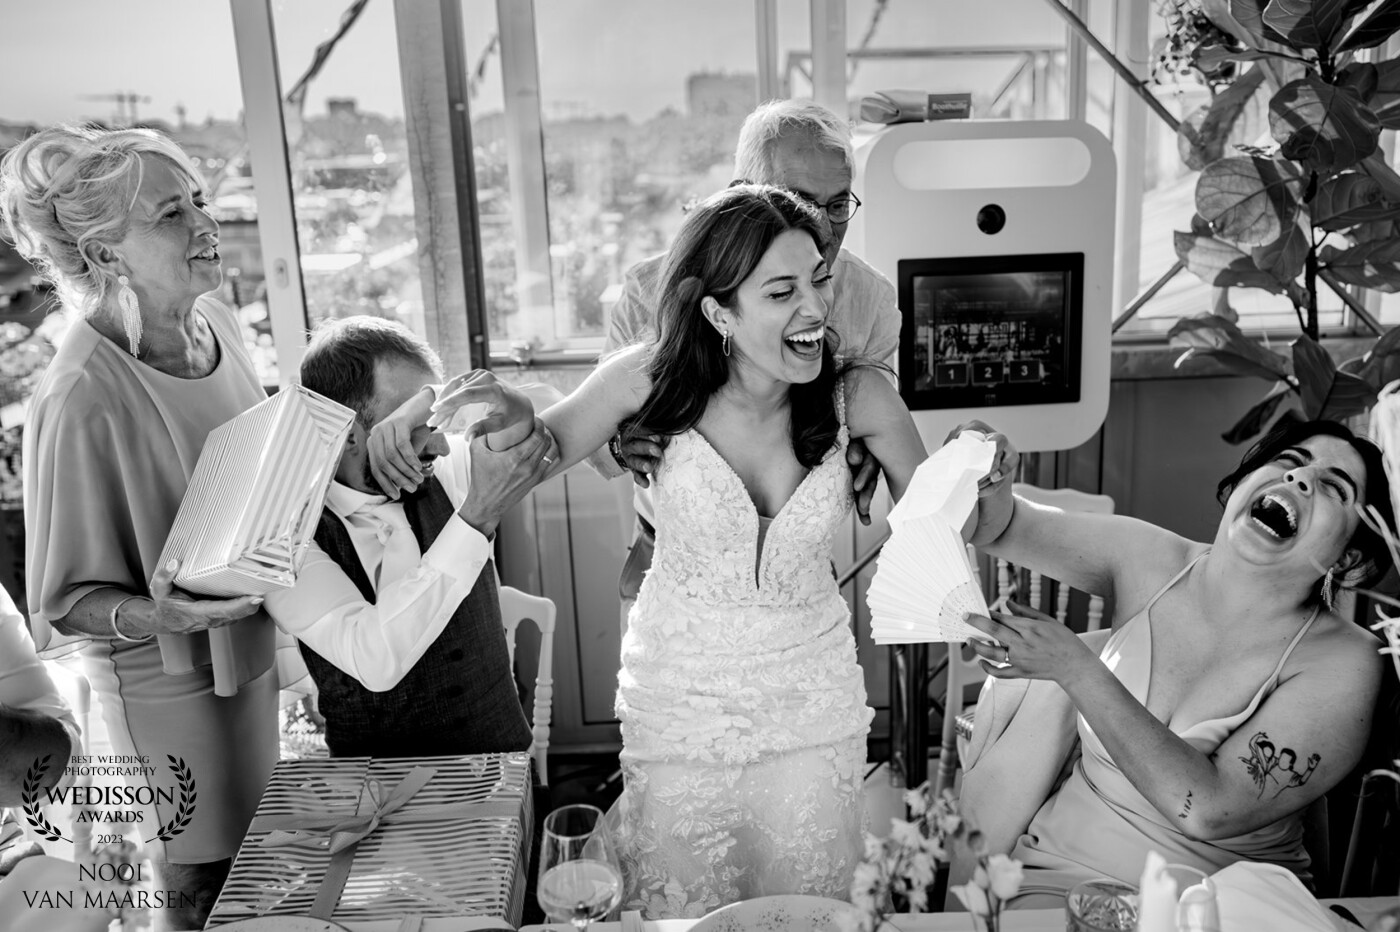 I will never forget this moment. Don't ask me why but the bride and groom were opening the presents that the parents of the groom gave them and out of the blue the bride just randomly fell of her chair. She and her friend couldn't stop laughing. It was a moment to remember.